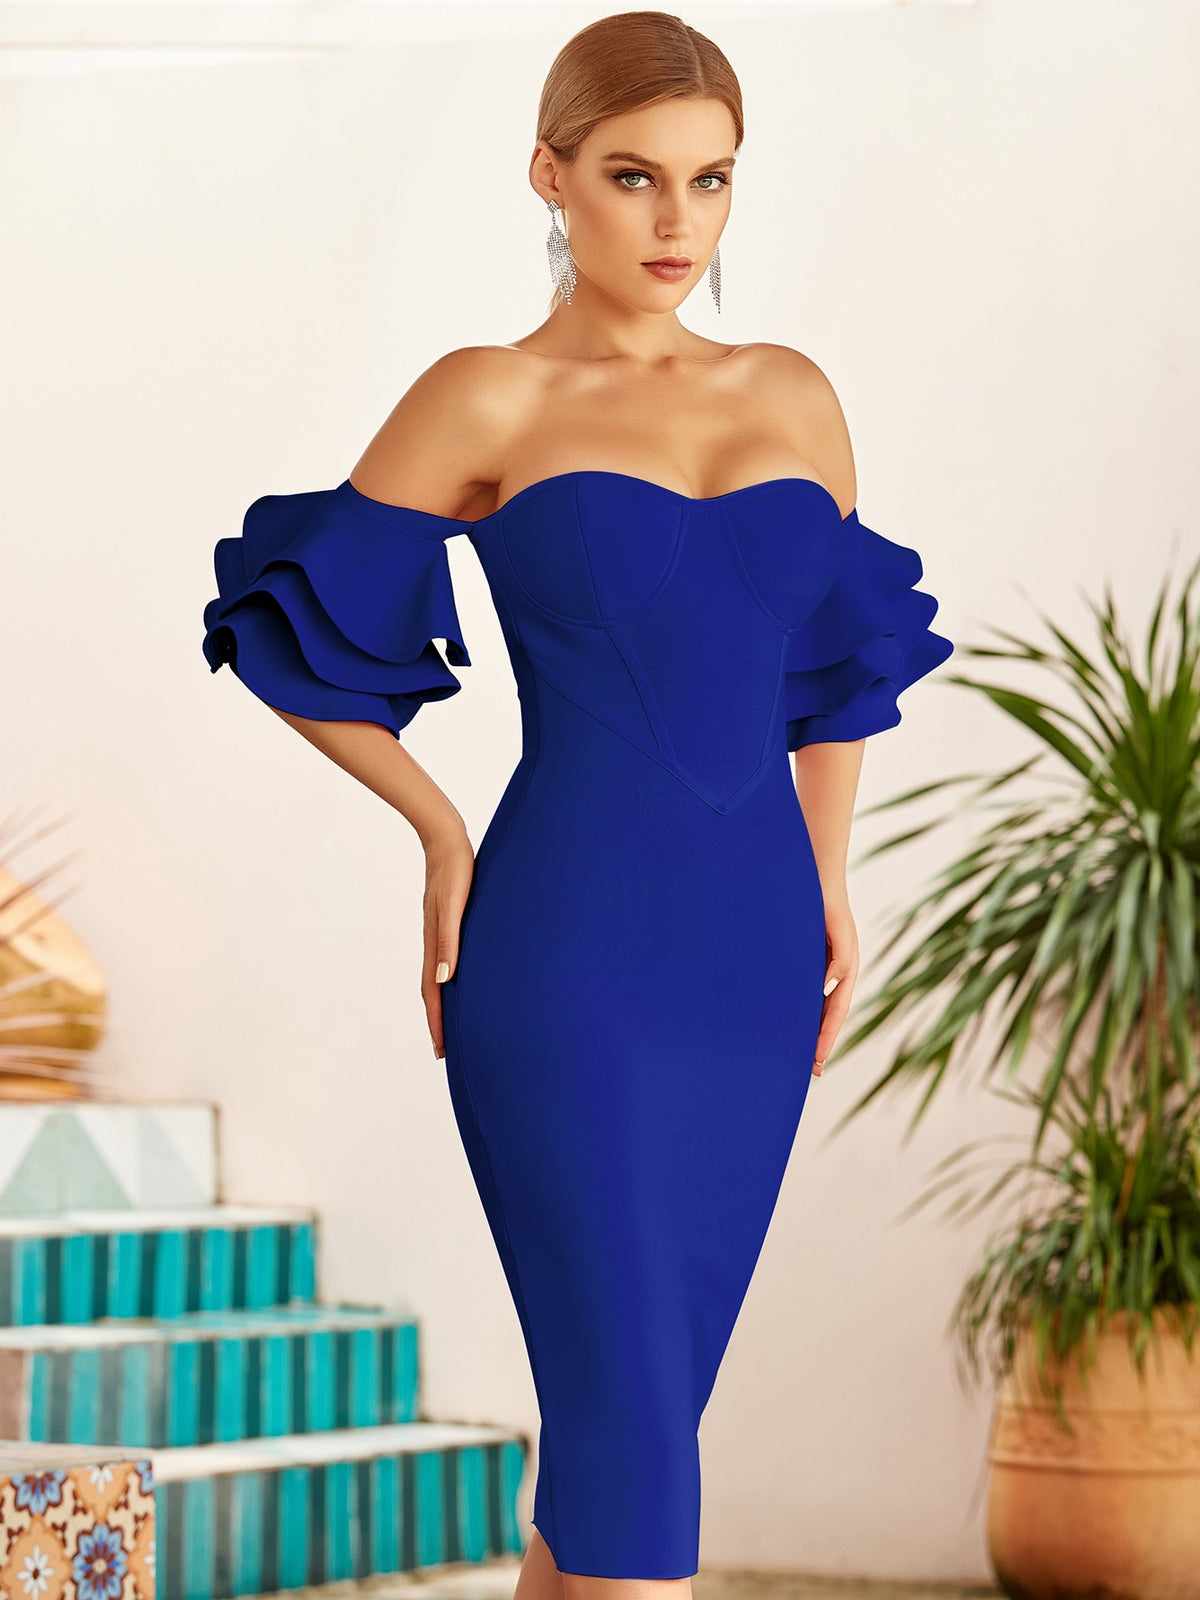 Adyce 2023 New Summer Women Blue Off Shoulder Bodycon Bandage Dress Sexy Butterfly Short Sleeve Hot Celebrity Runway Party Dress